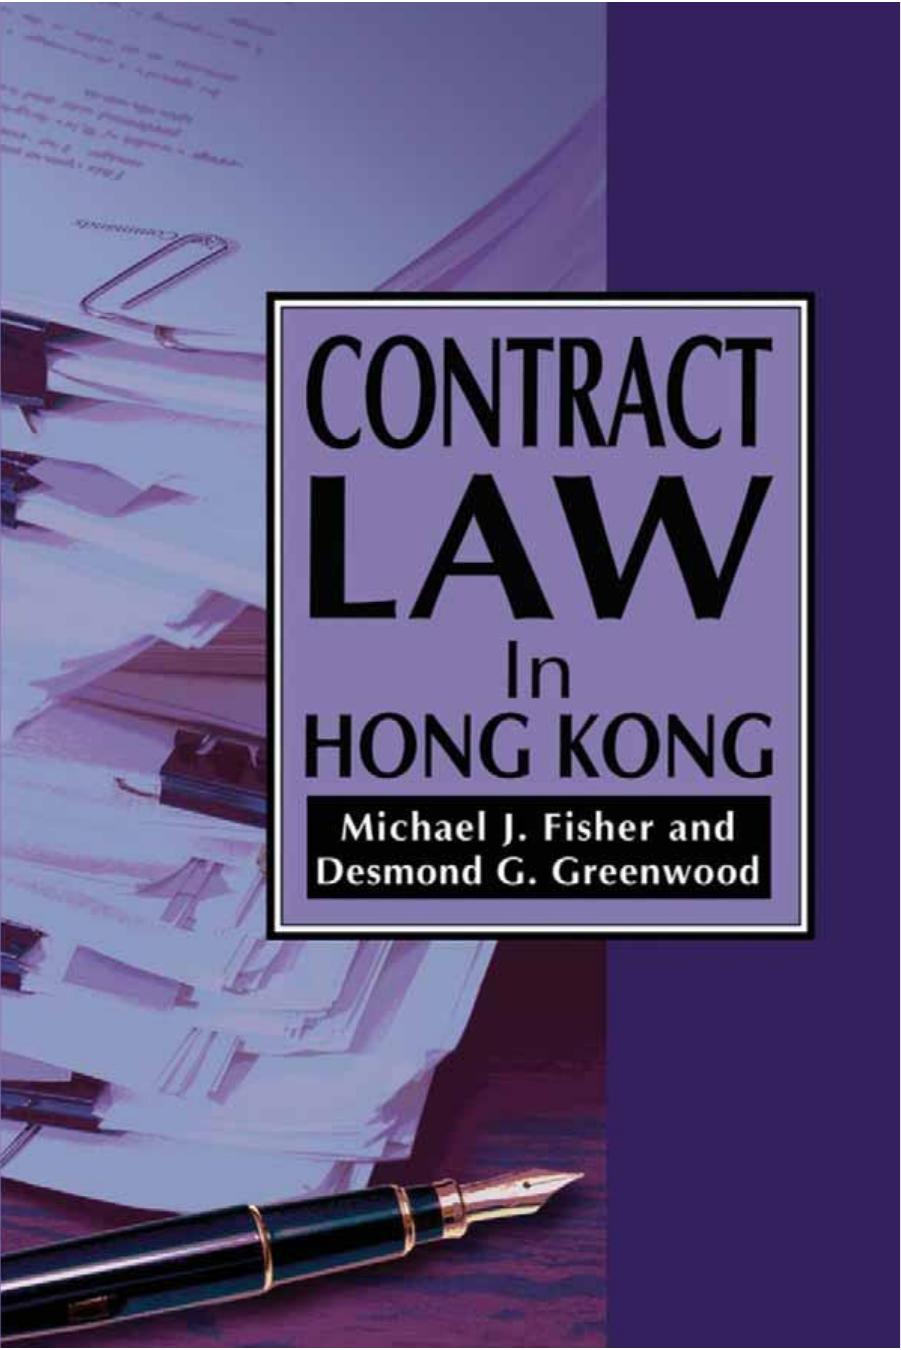 Contract Law in Hong Kong by Michael J. Fisher; Desmond G. Greenwood